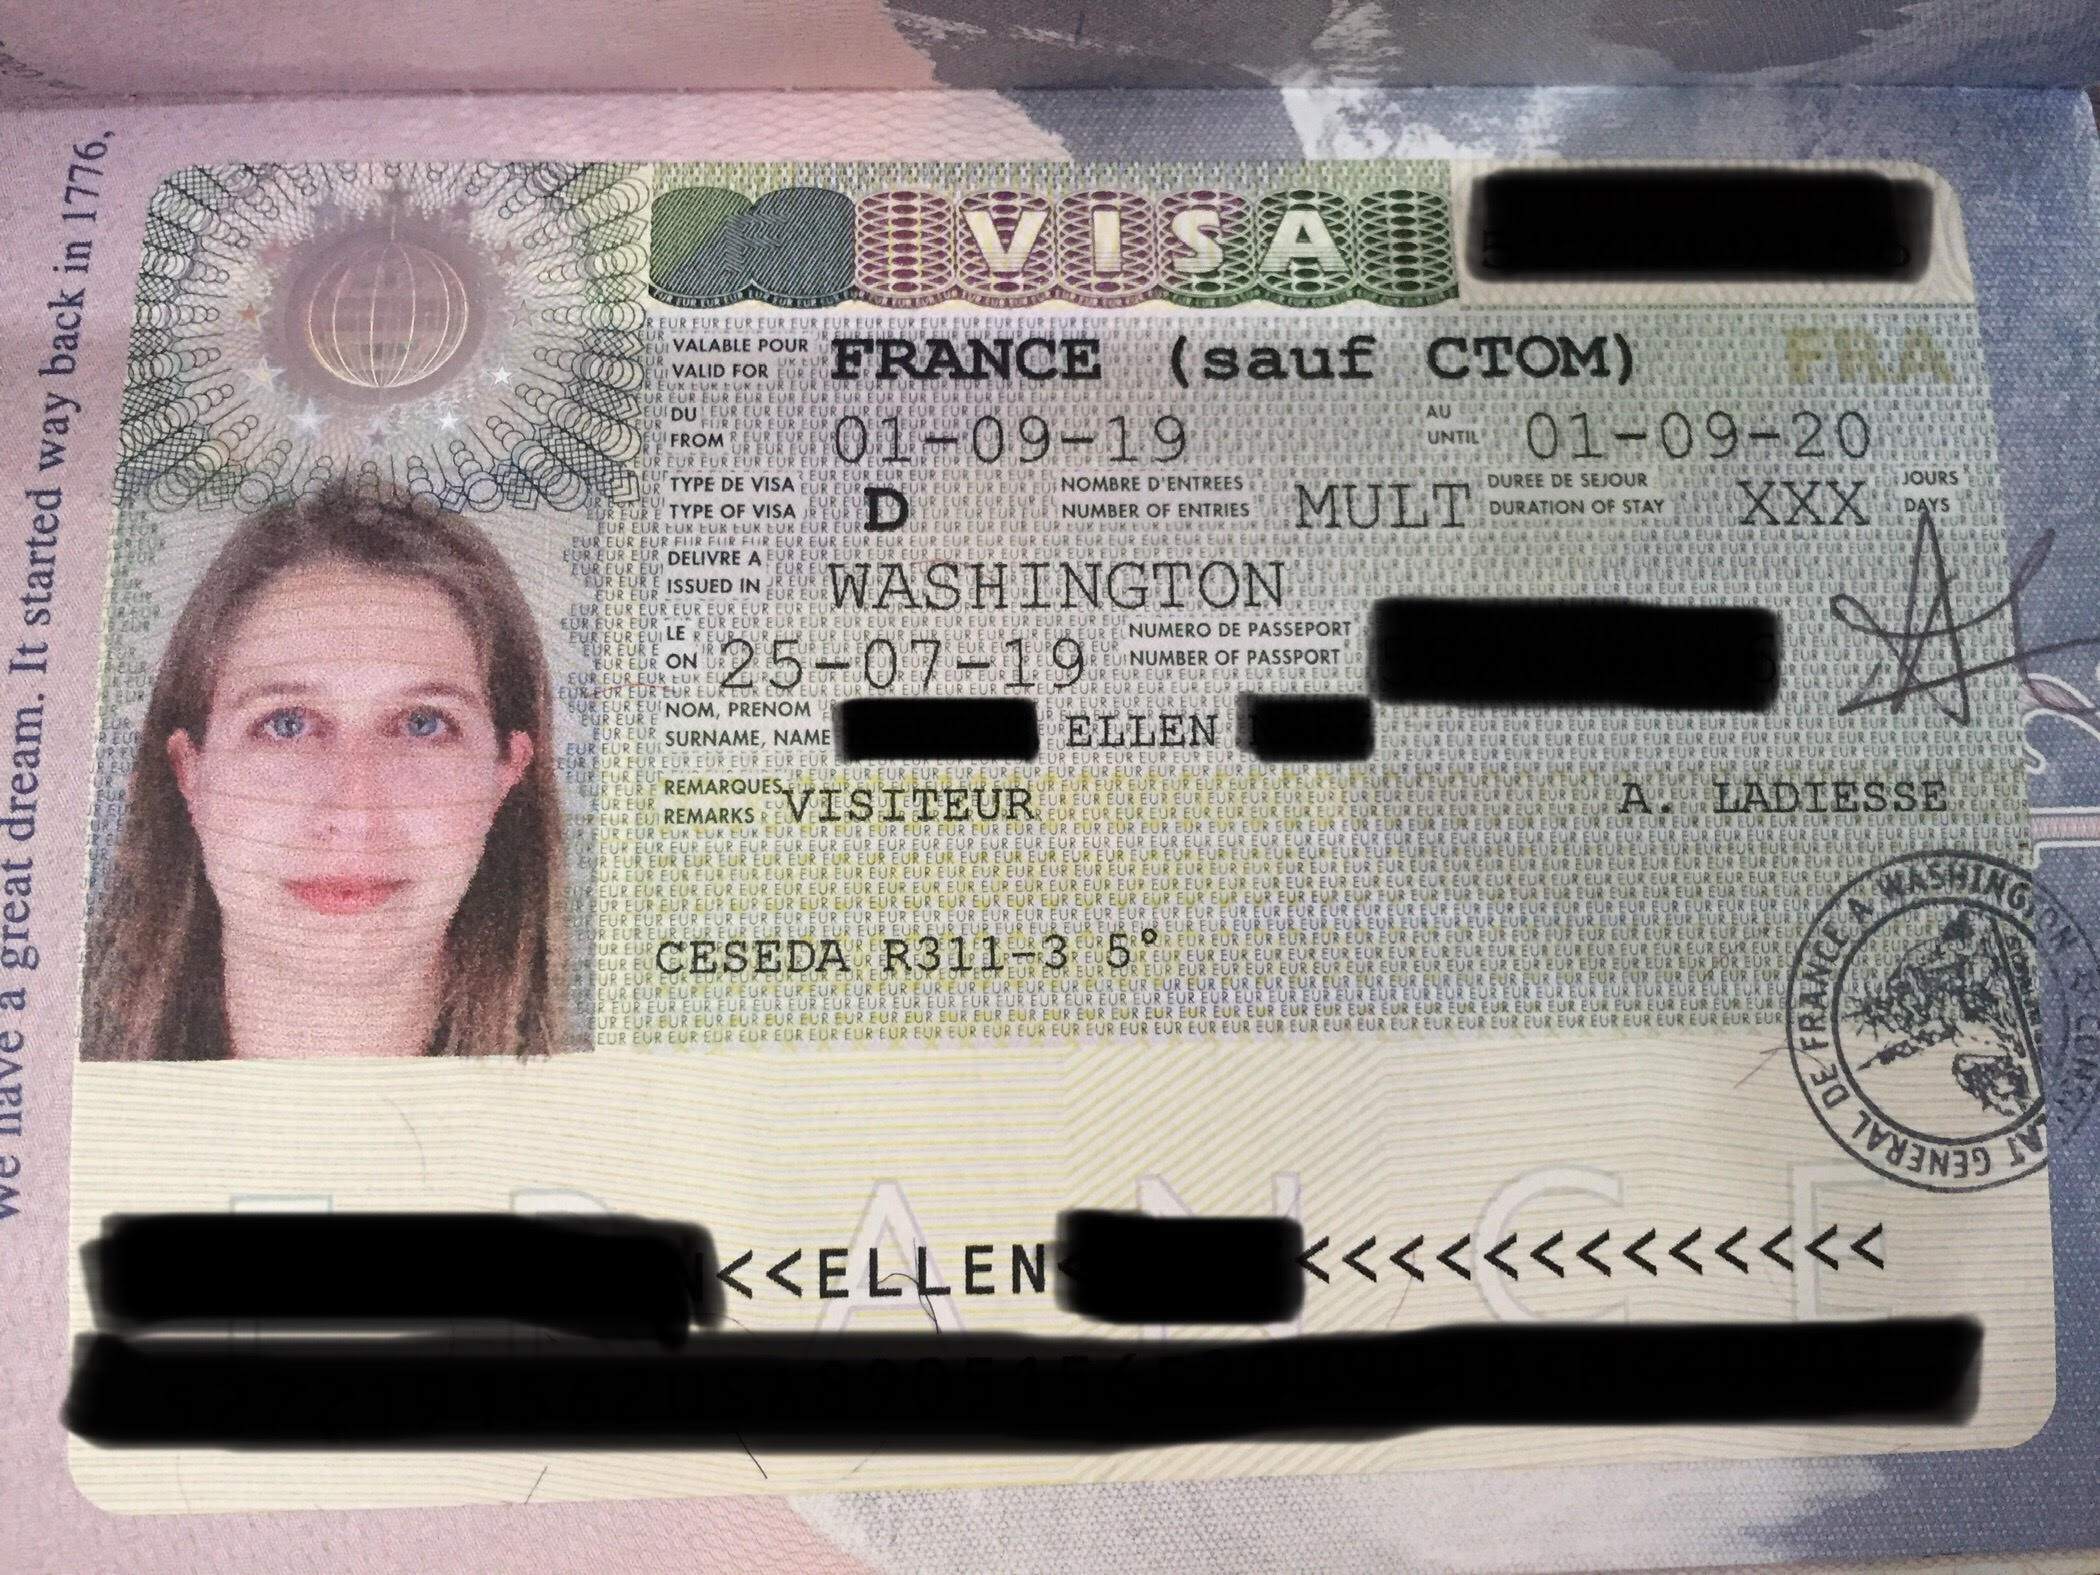 French Consulate in NY: Applying for a Long Stay Student Visa